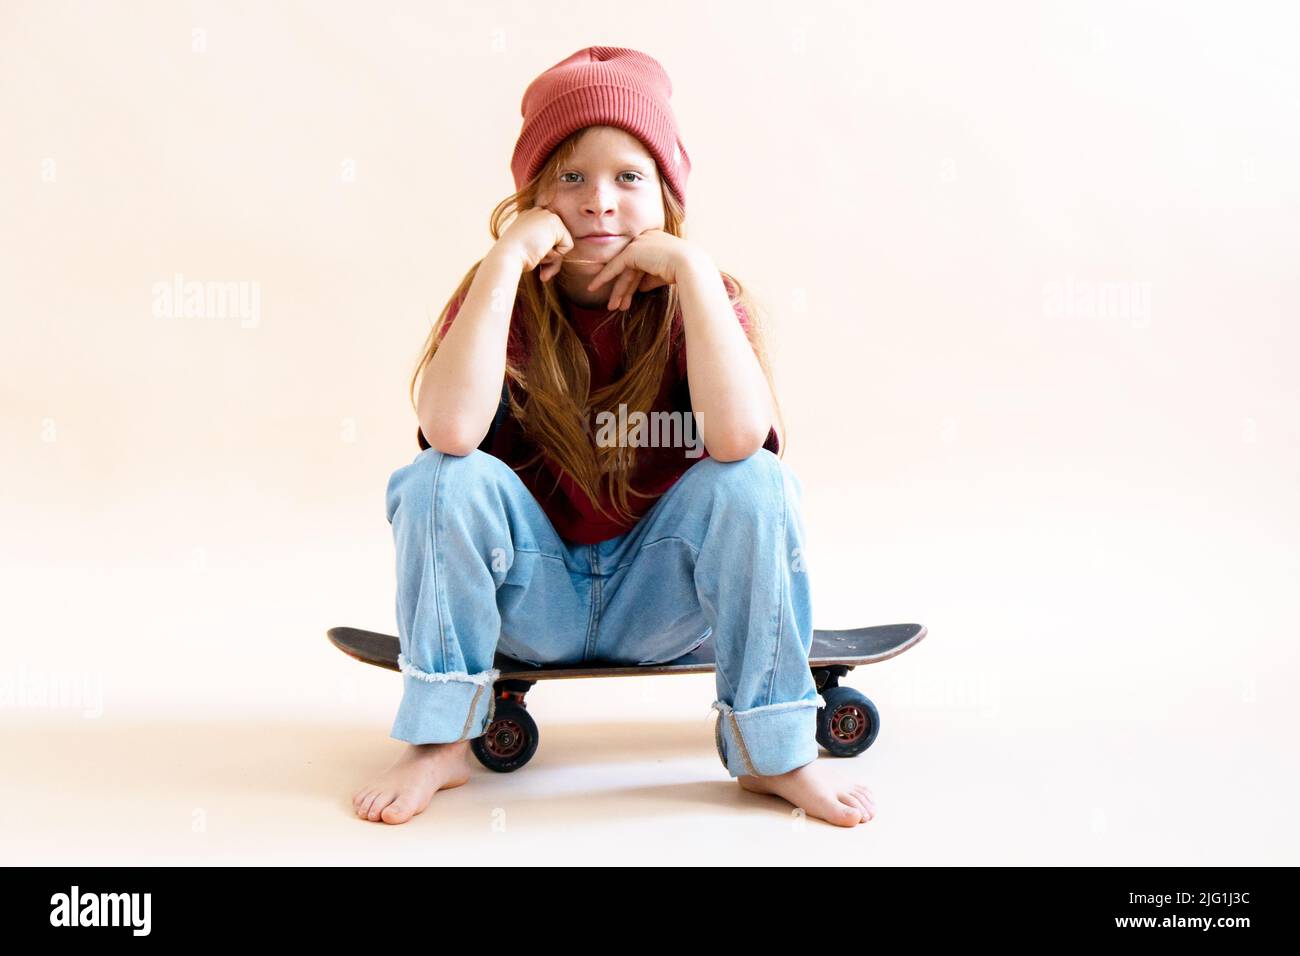 Boy with long red hair sitting on a skateboard on a light background.Front view .Hipster character. Outdoor summer fun. School background.  Stock Photo